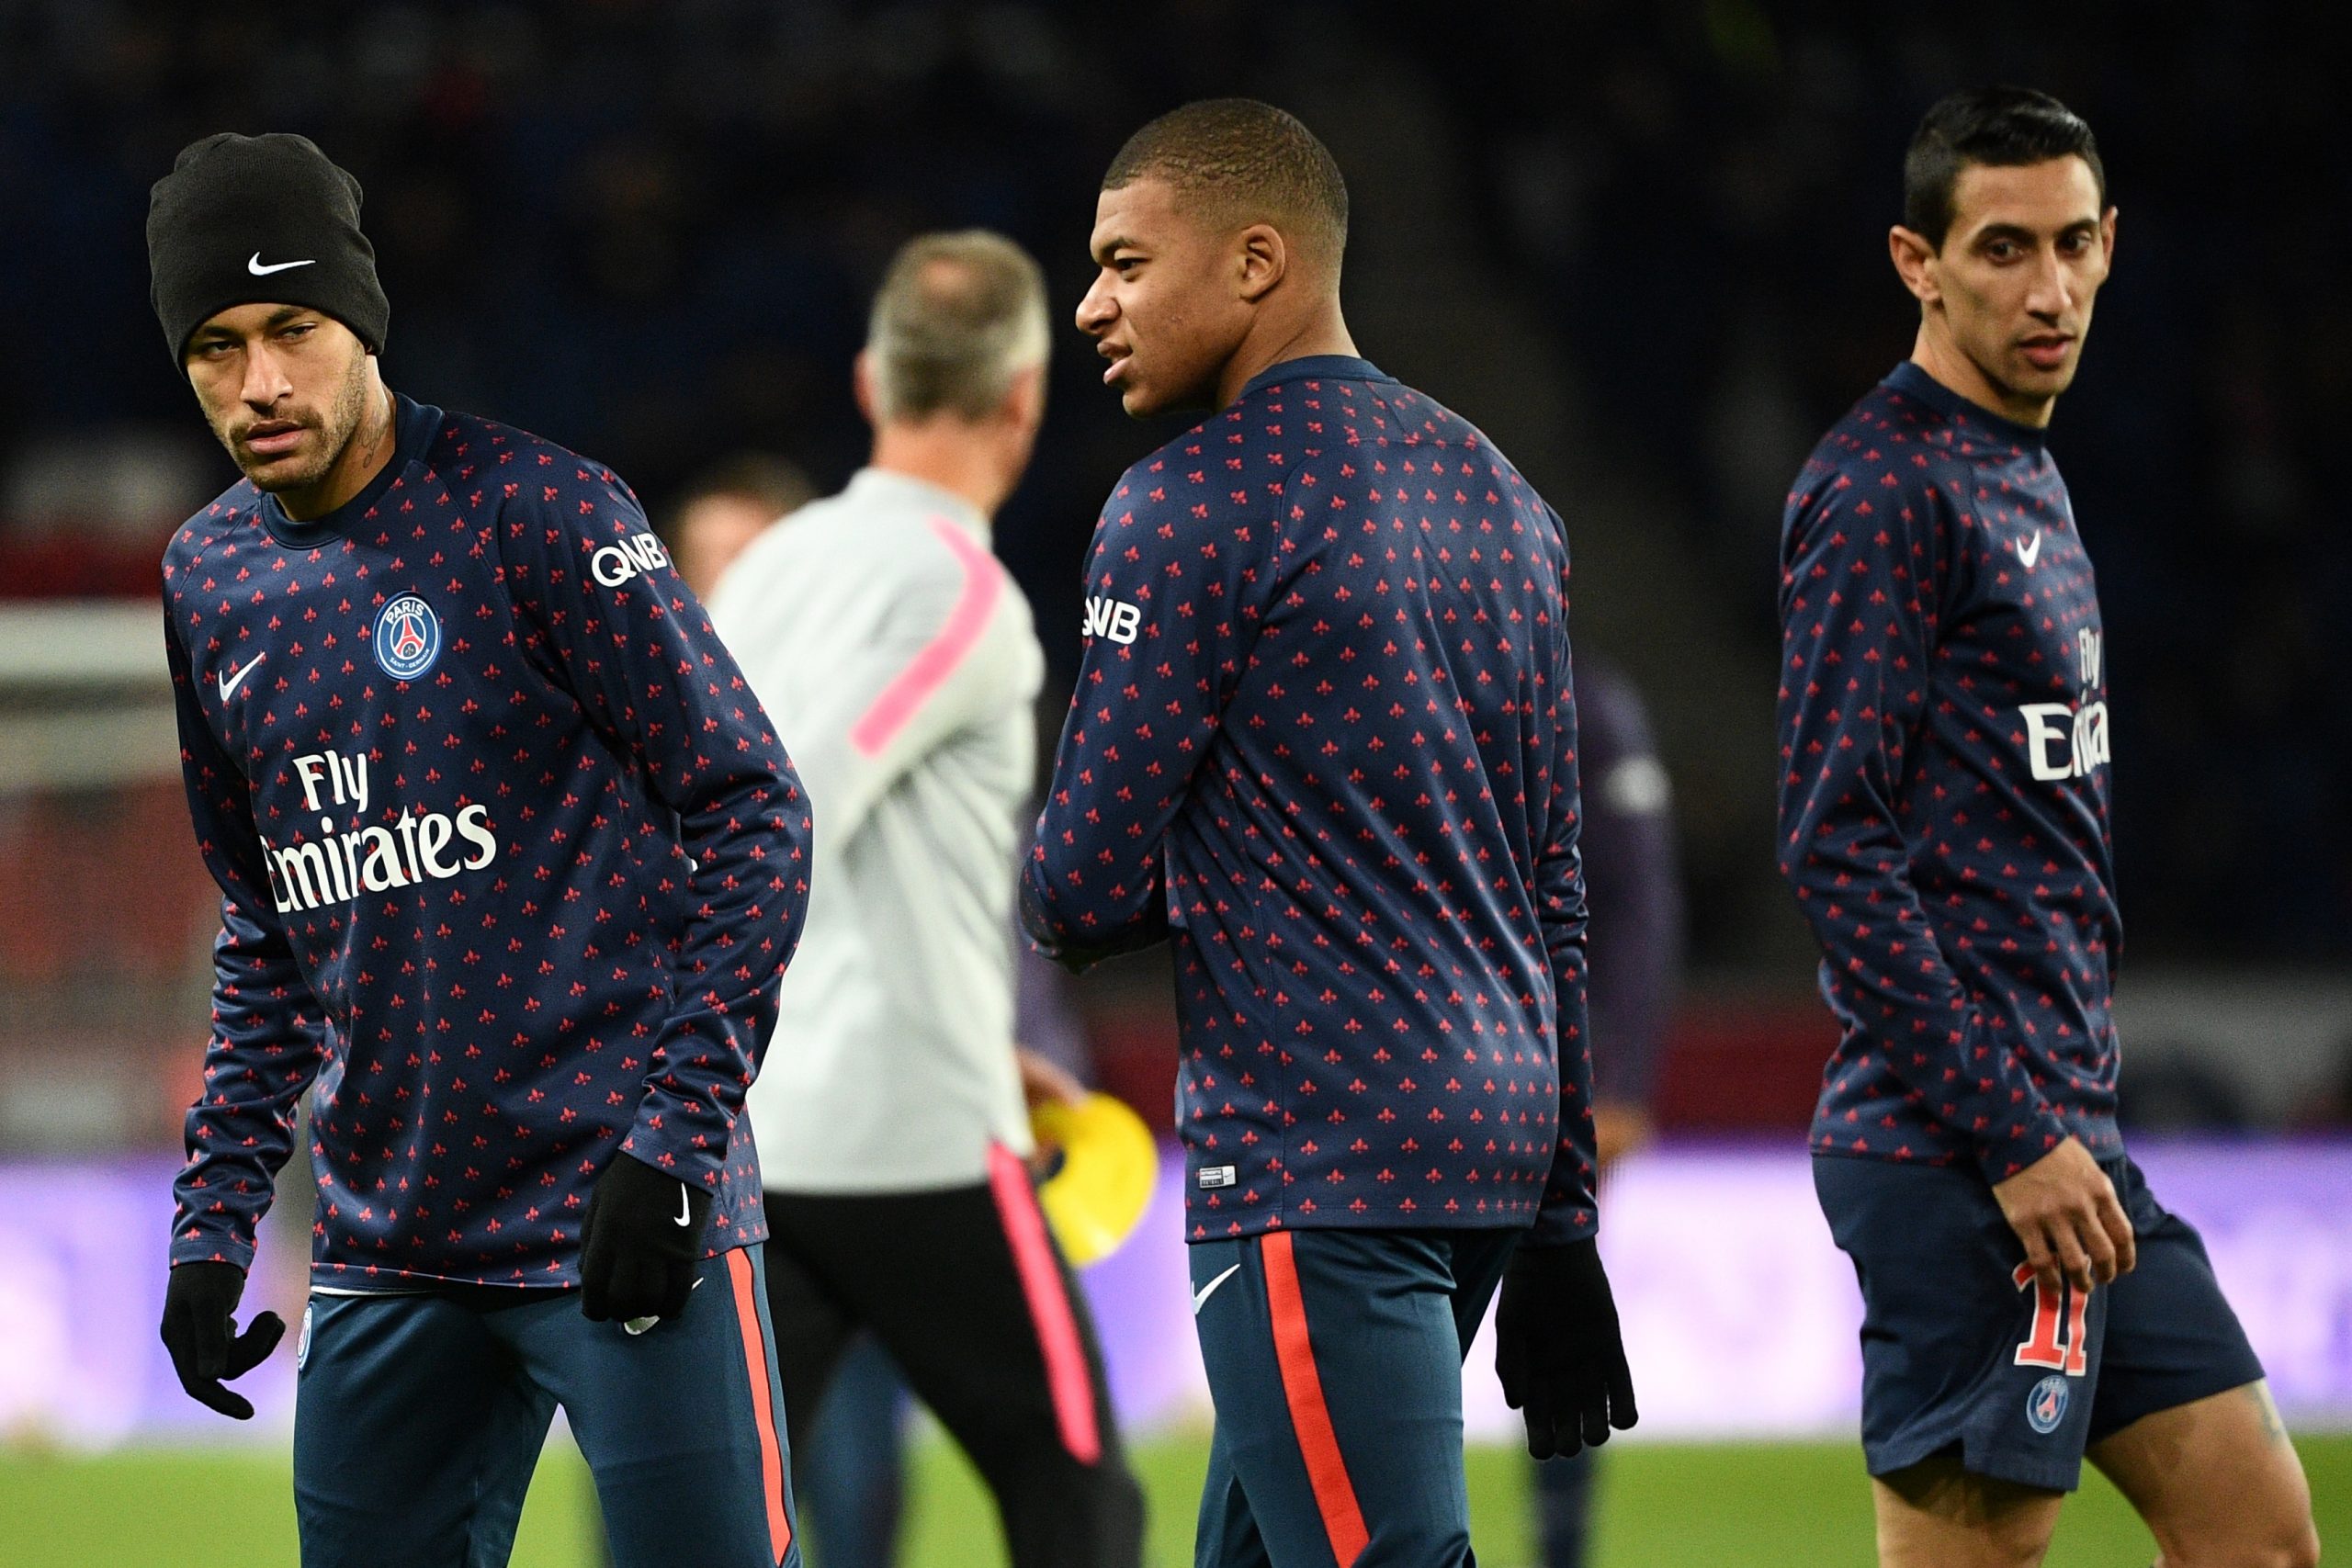 Liverpool to rival Real Madrid for Kylian Mbappe who is seen in the photo